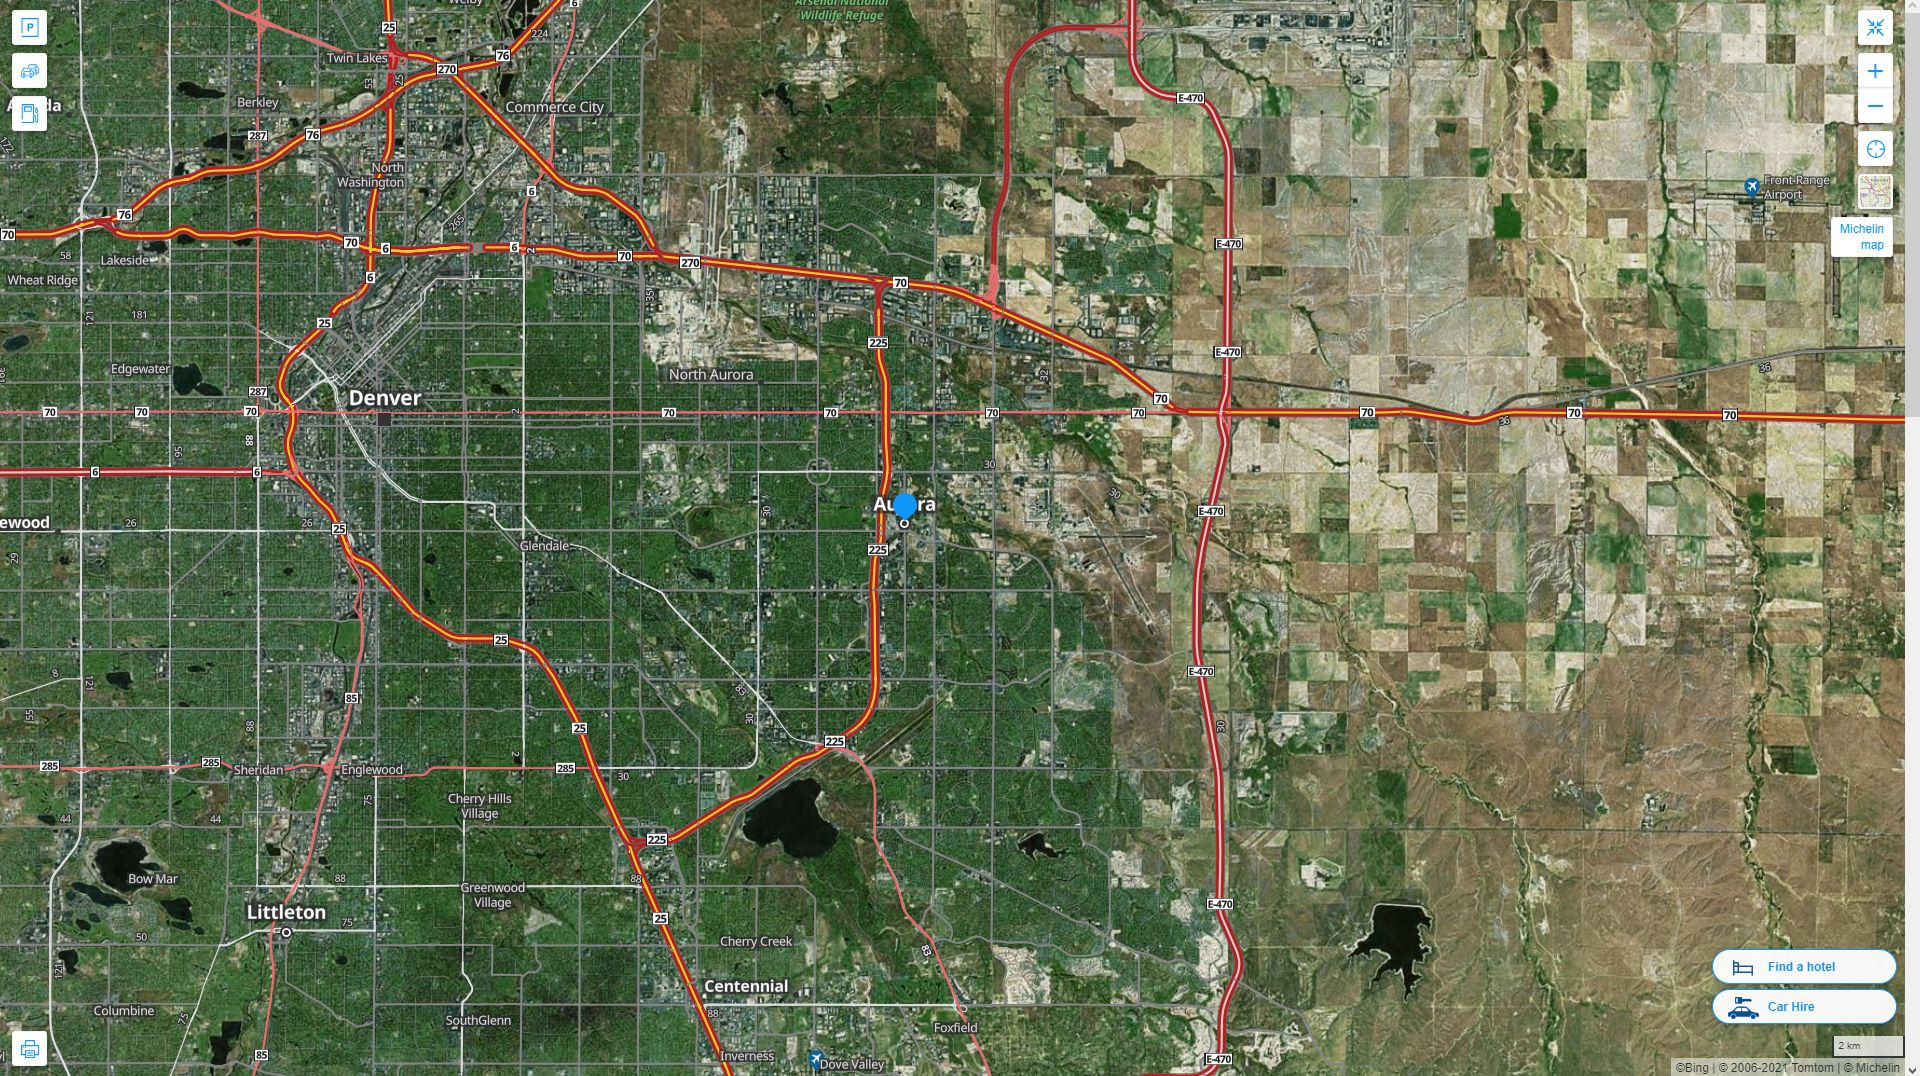 Aurora Colorado Highway and Road Map with Satellite View